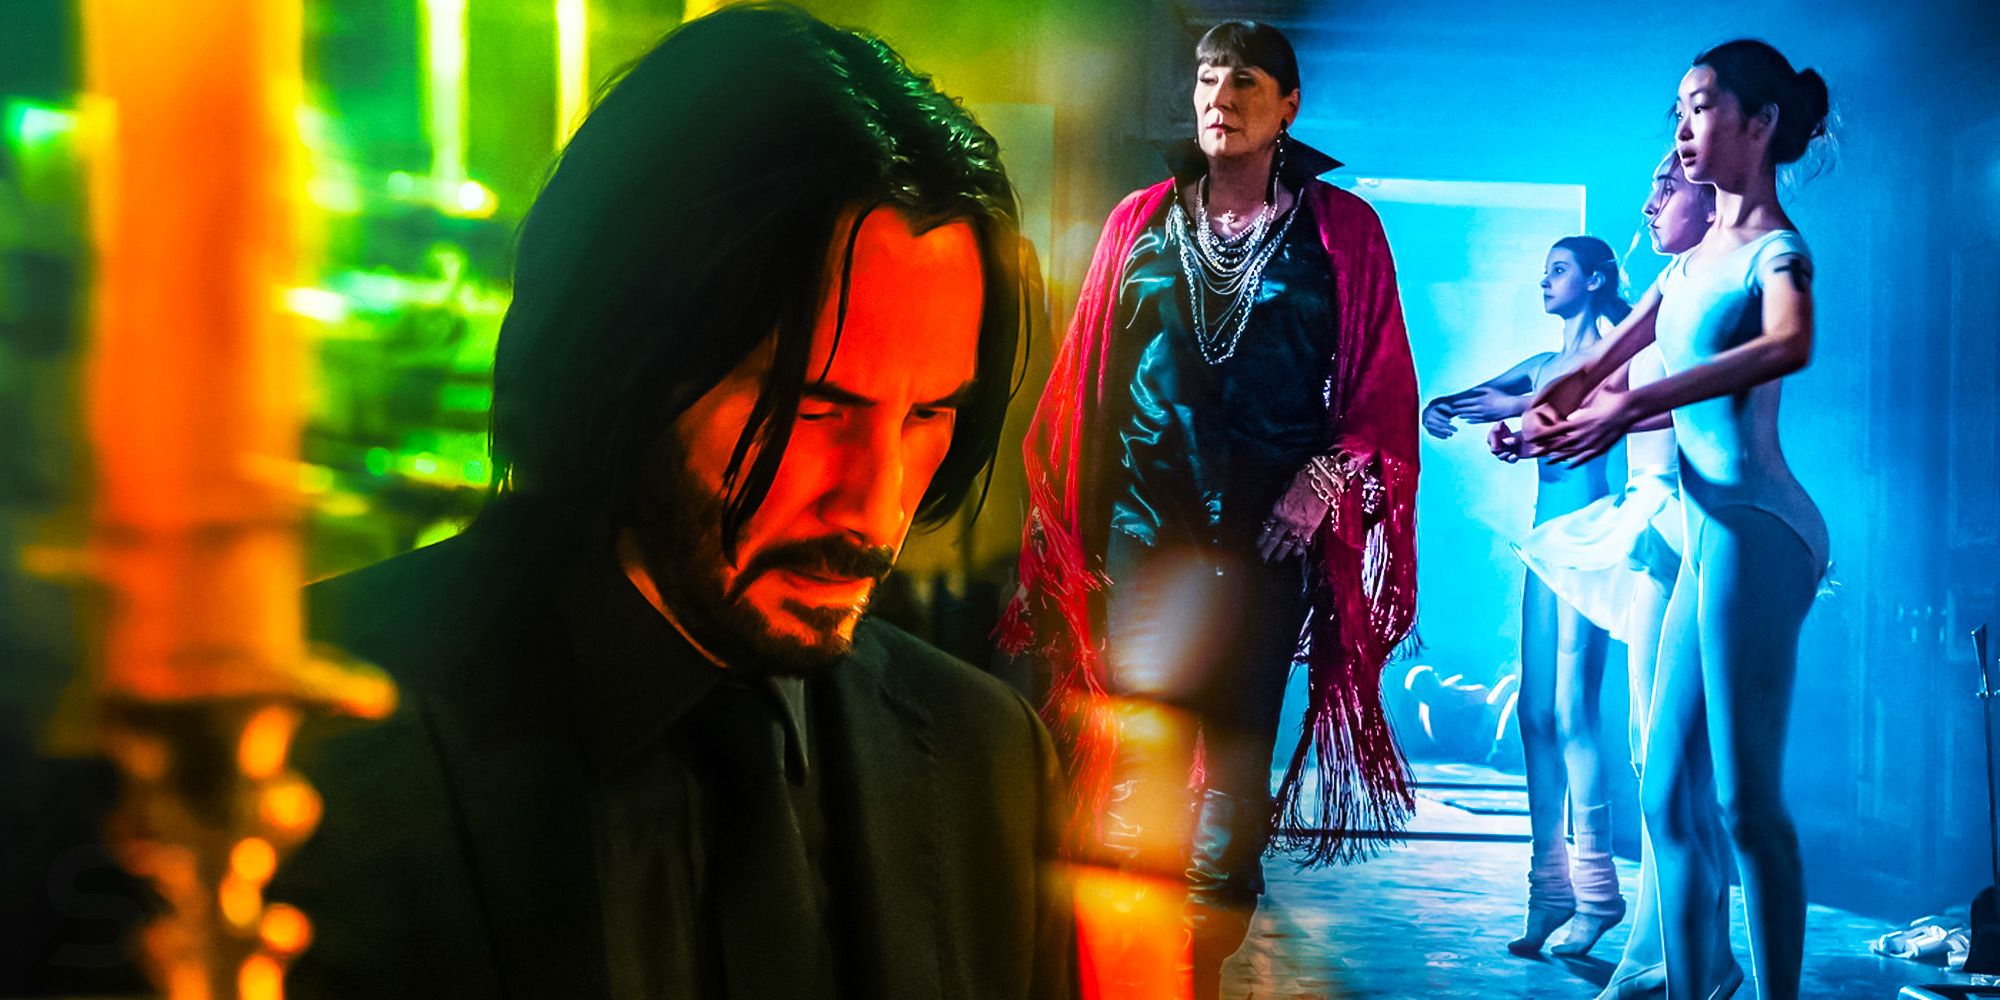 A composite image of John Wick with The Director